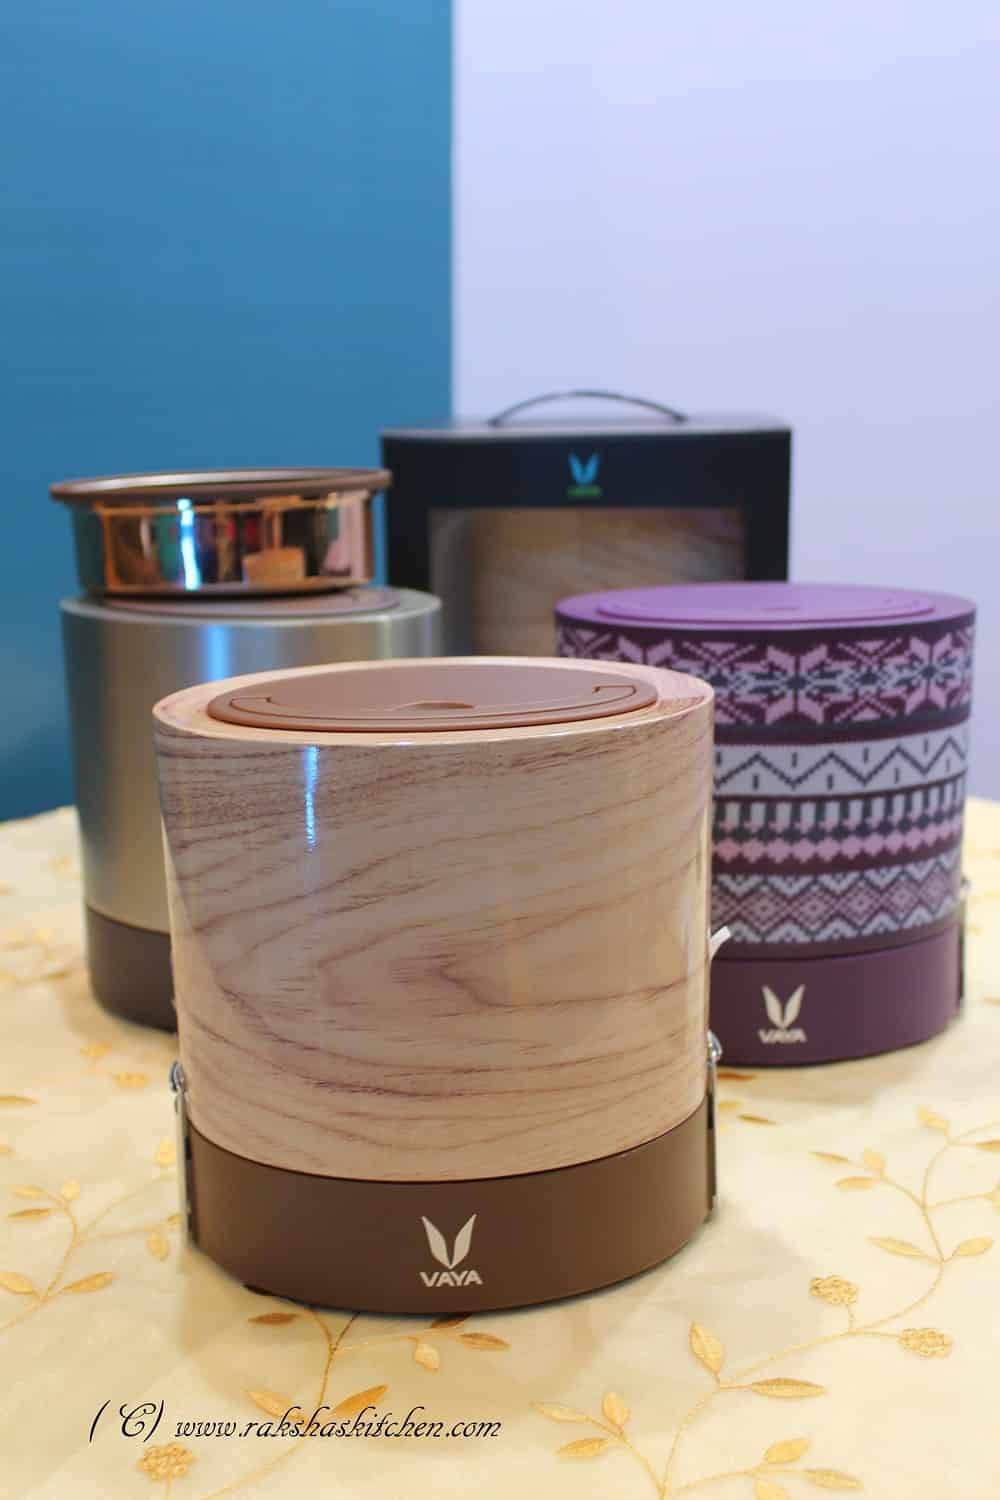 Vaya Tyffyn Lunch Boxes: An Updated Tradition